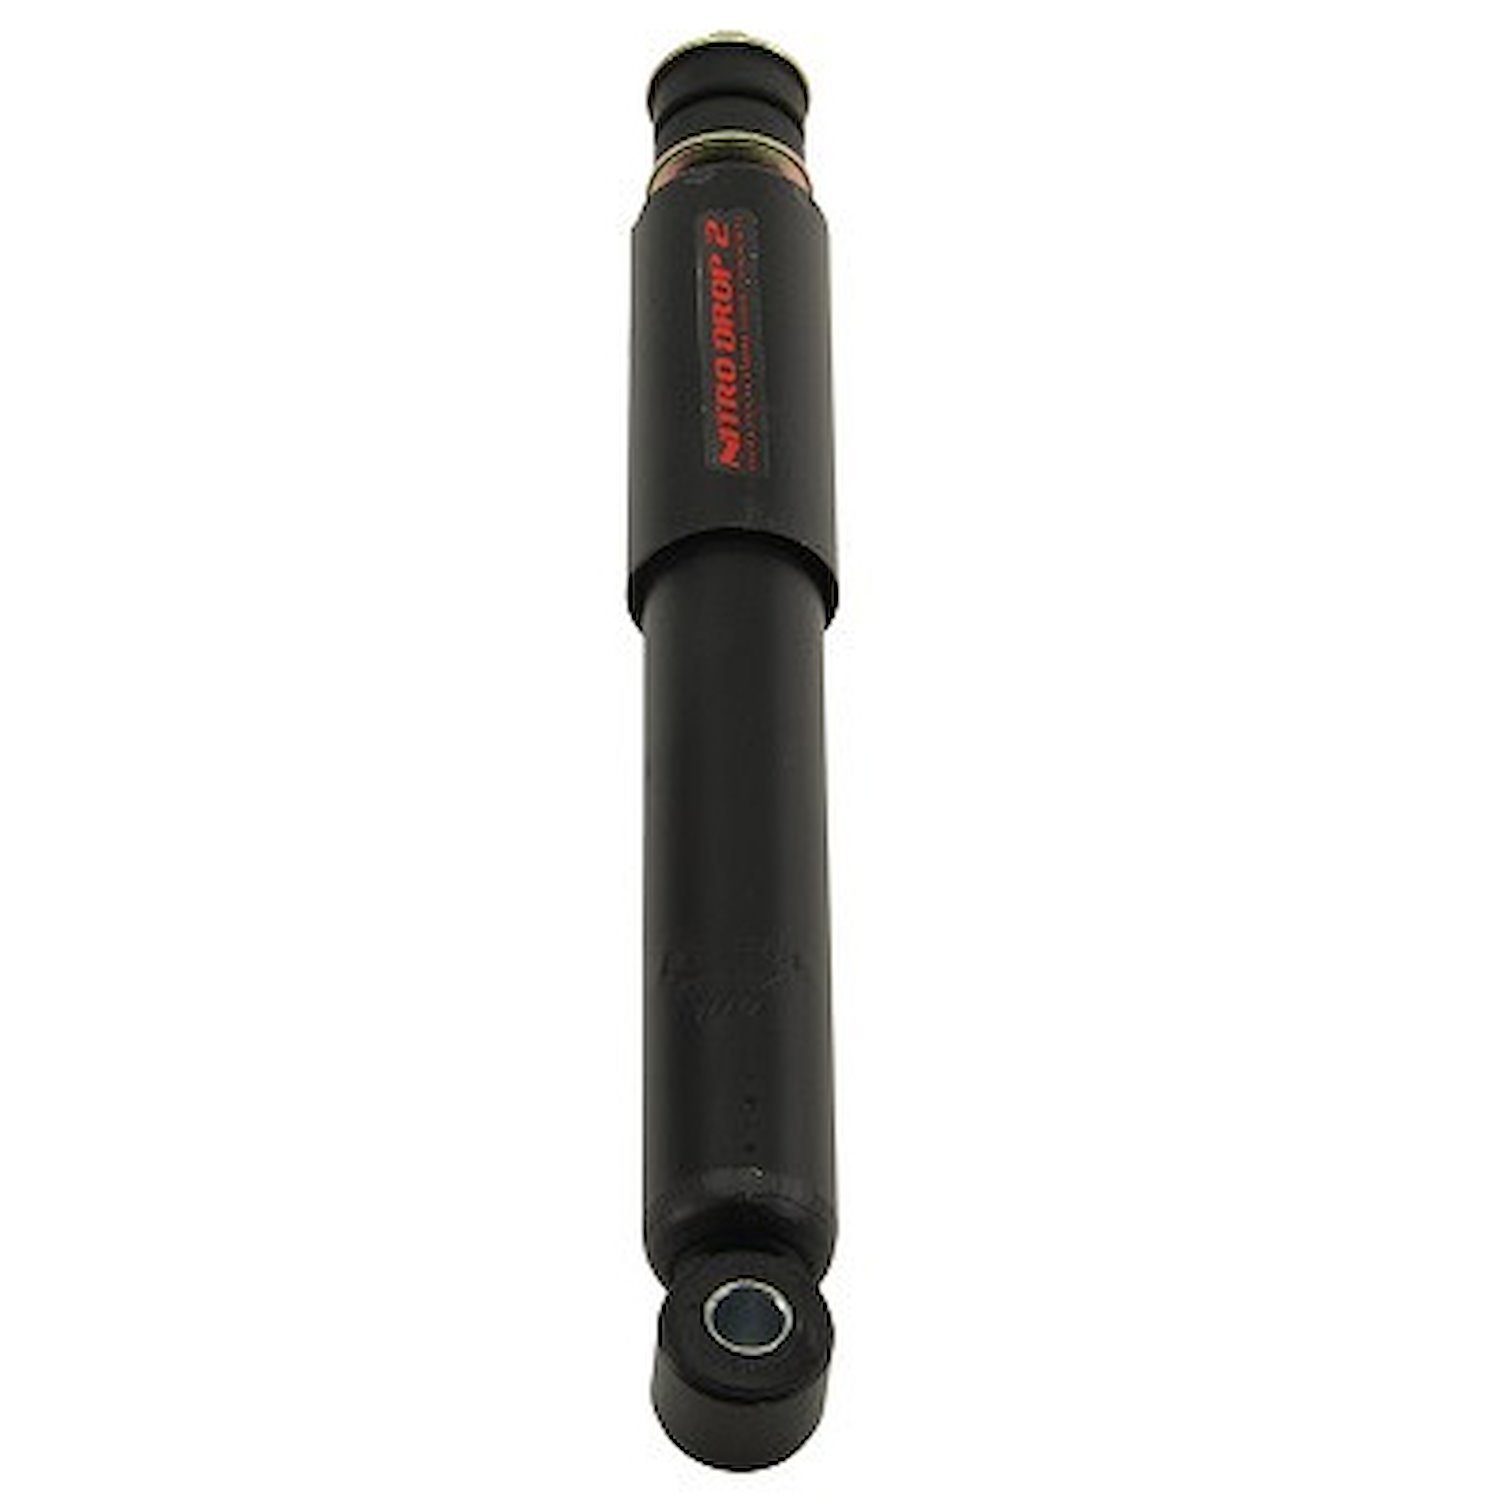 Nitro Drop 2 Front Shock Absorber for 1999-2012 Ford F-250/F-350 Trucks